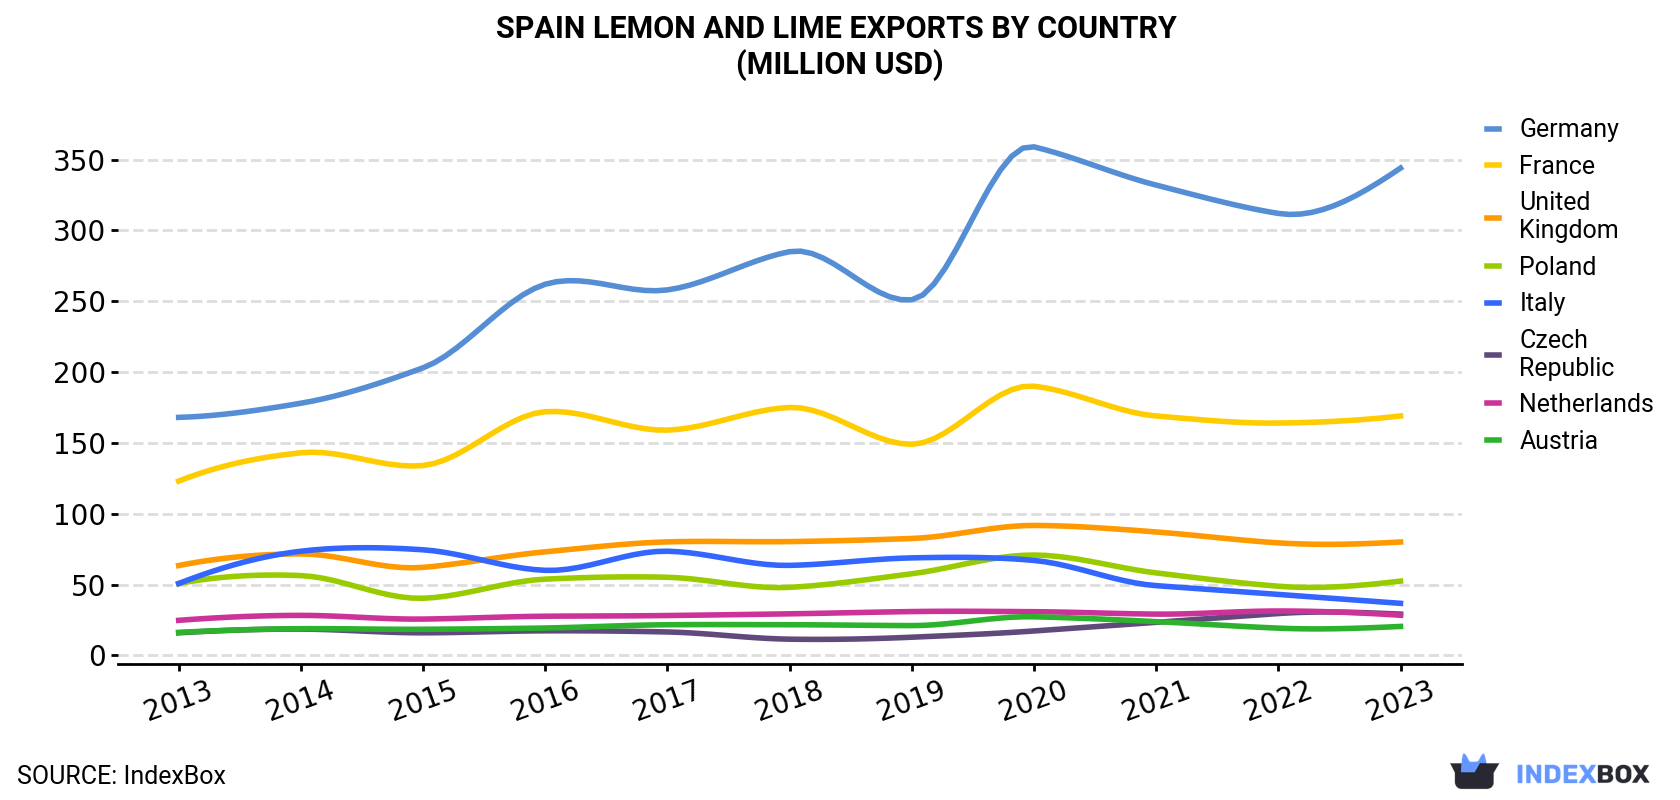 Spain Lemon And Lime Exports By Country (Million USD)